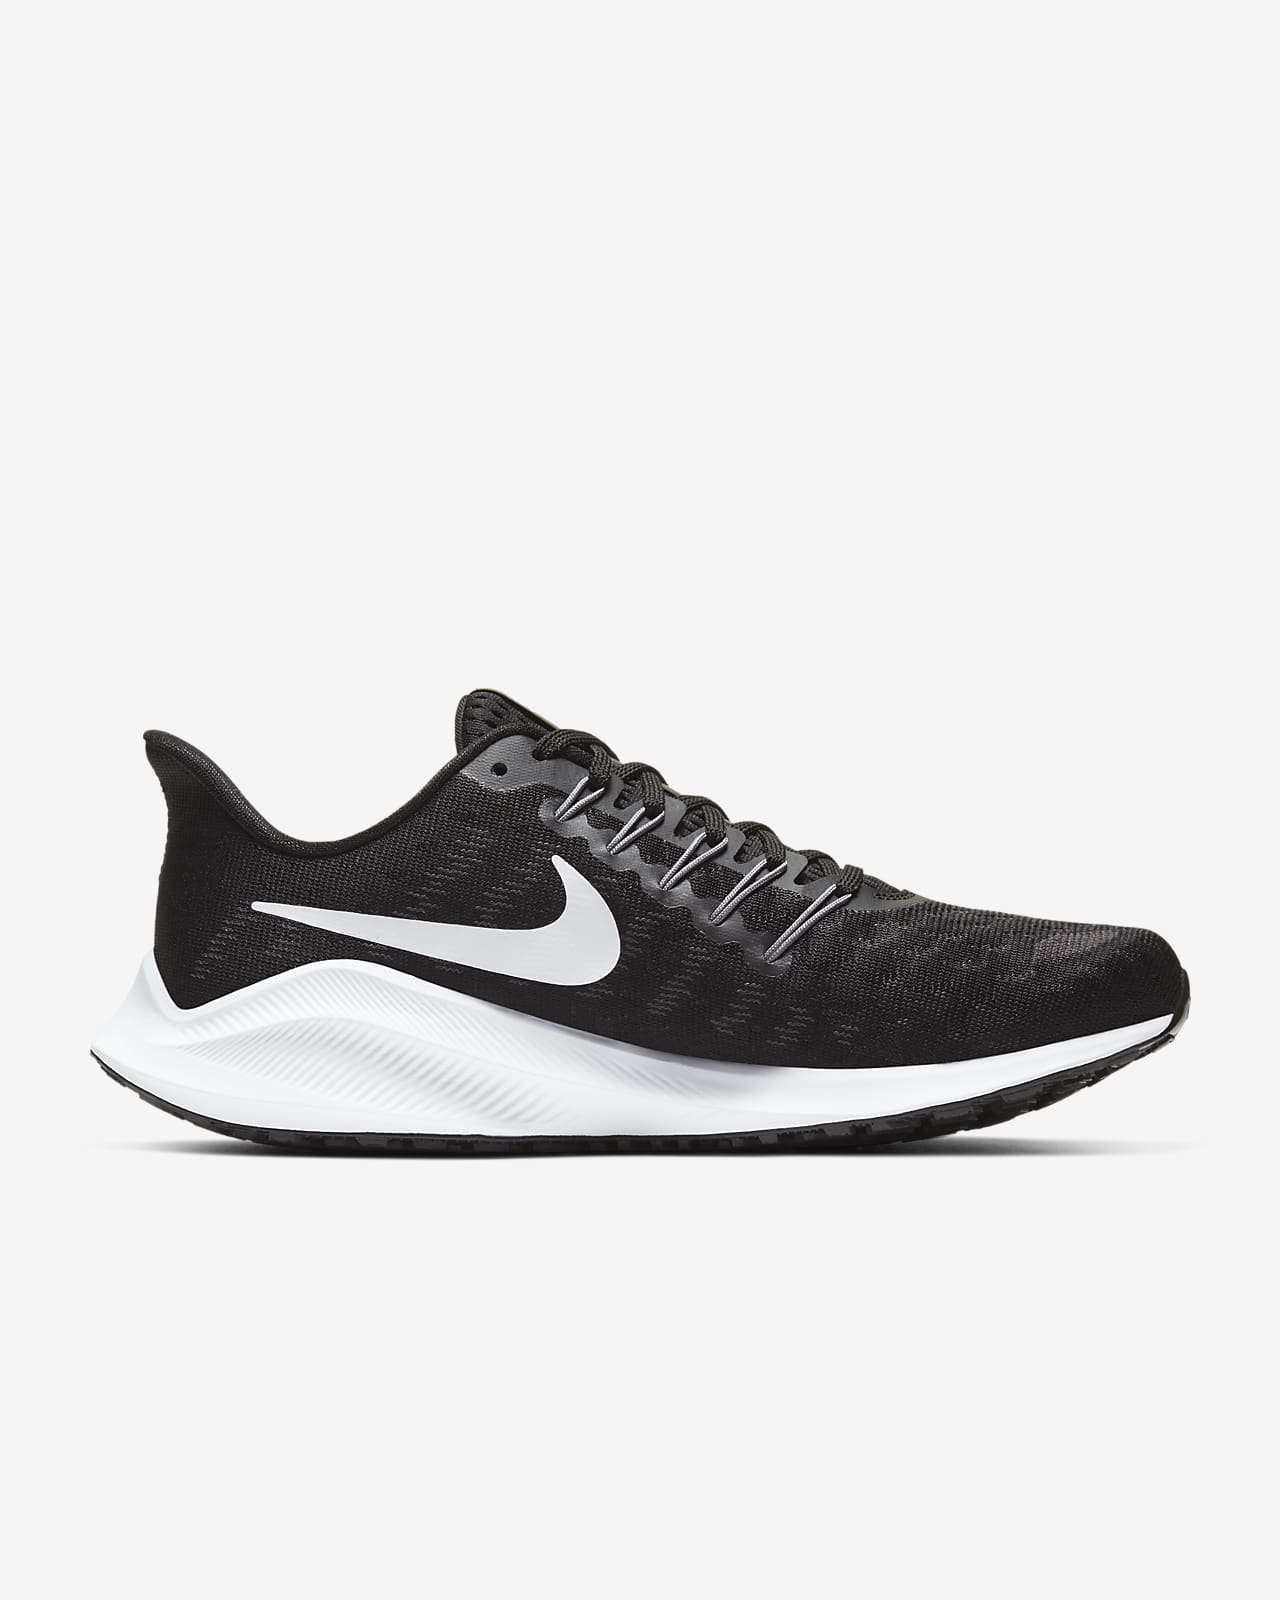 nike air zoom vomero 14 women's review